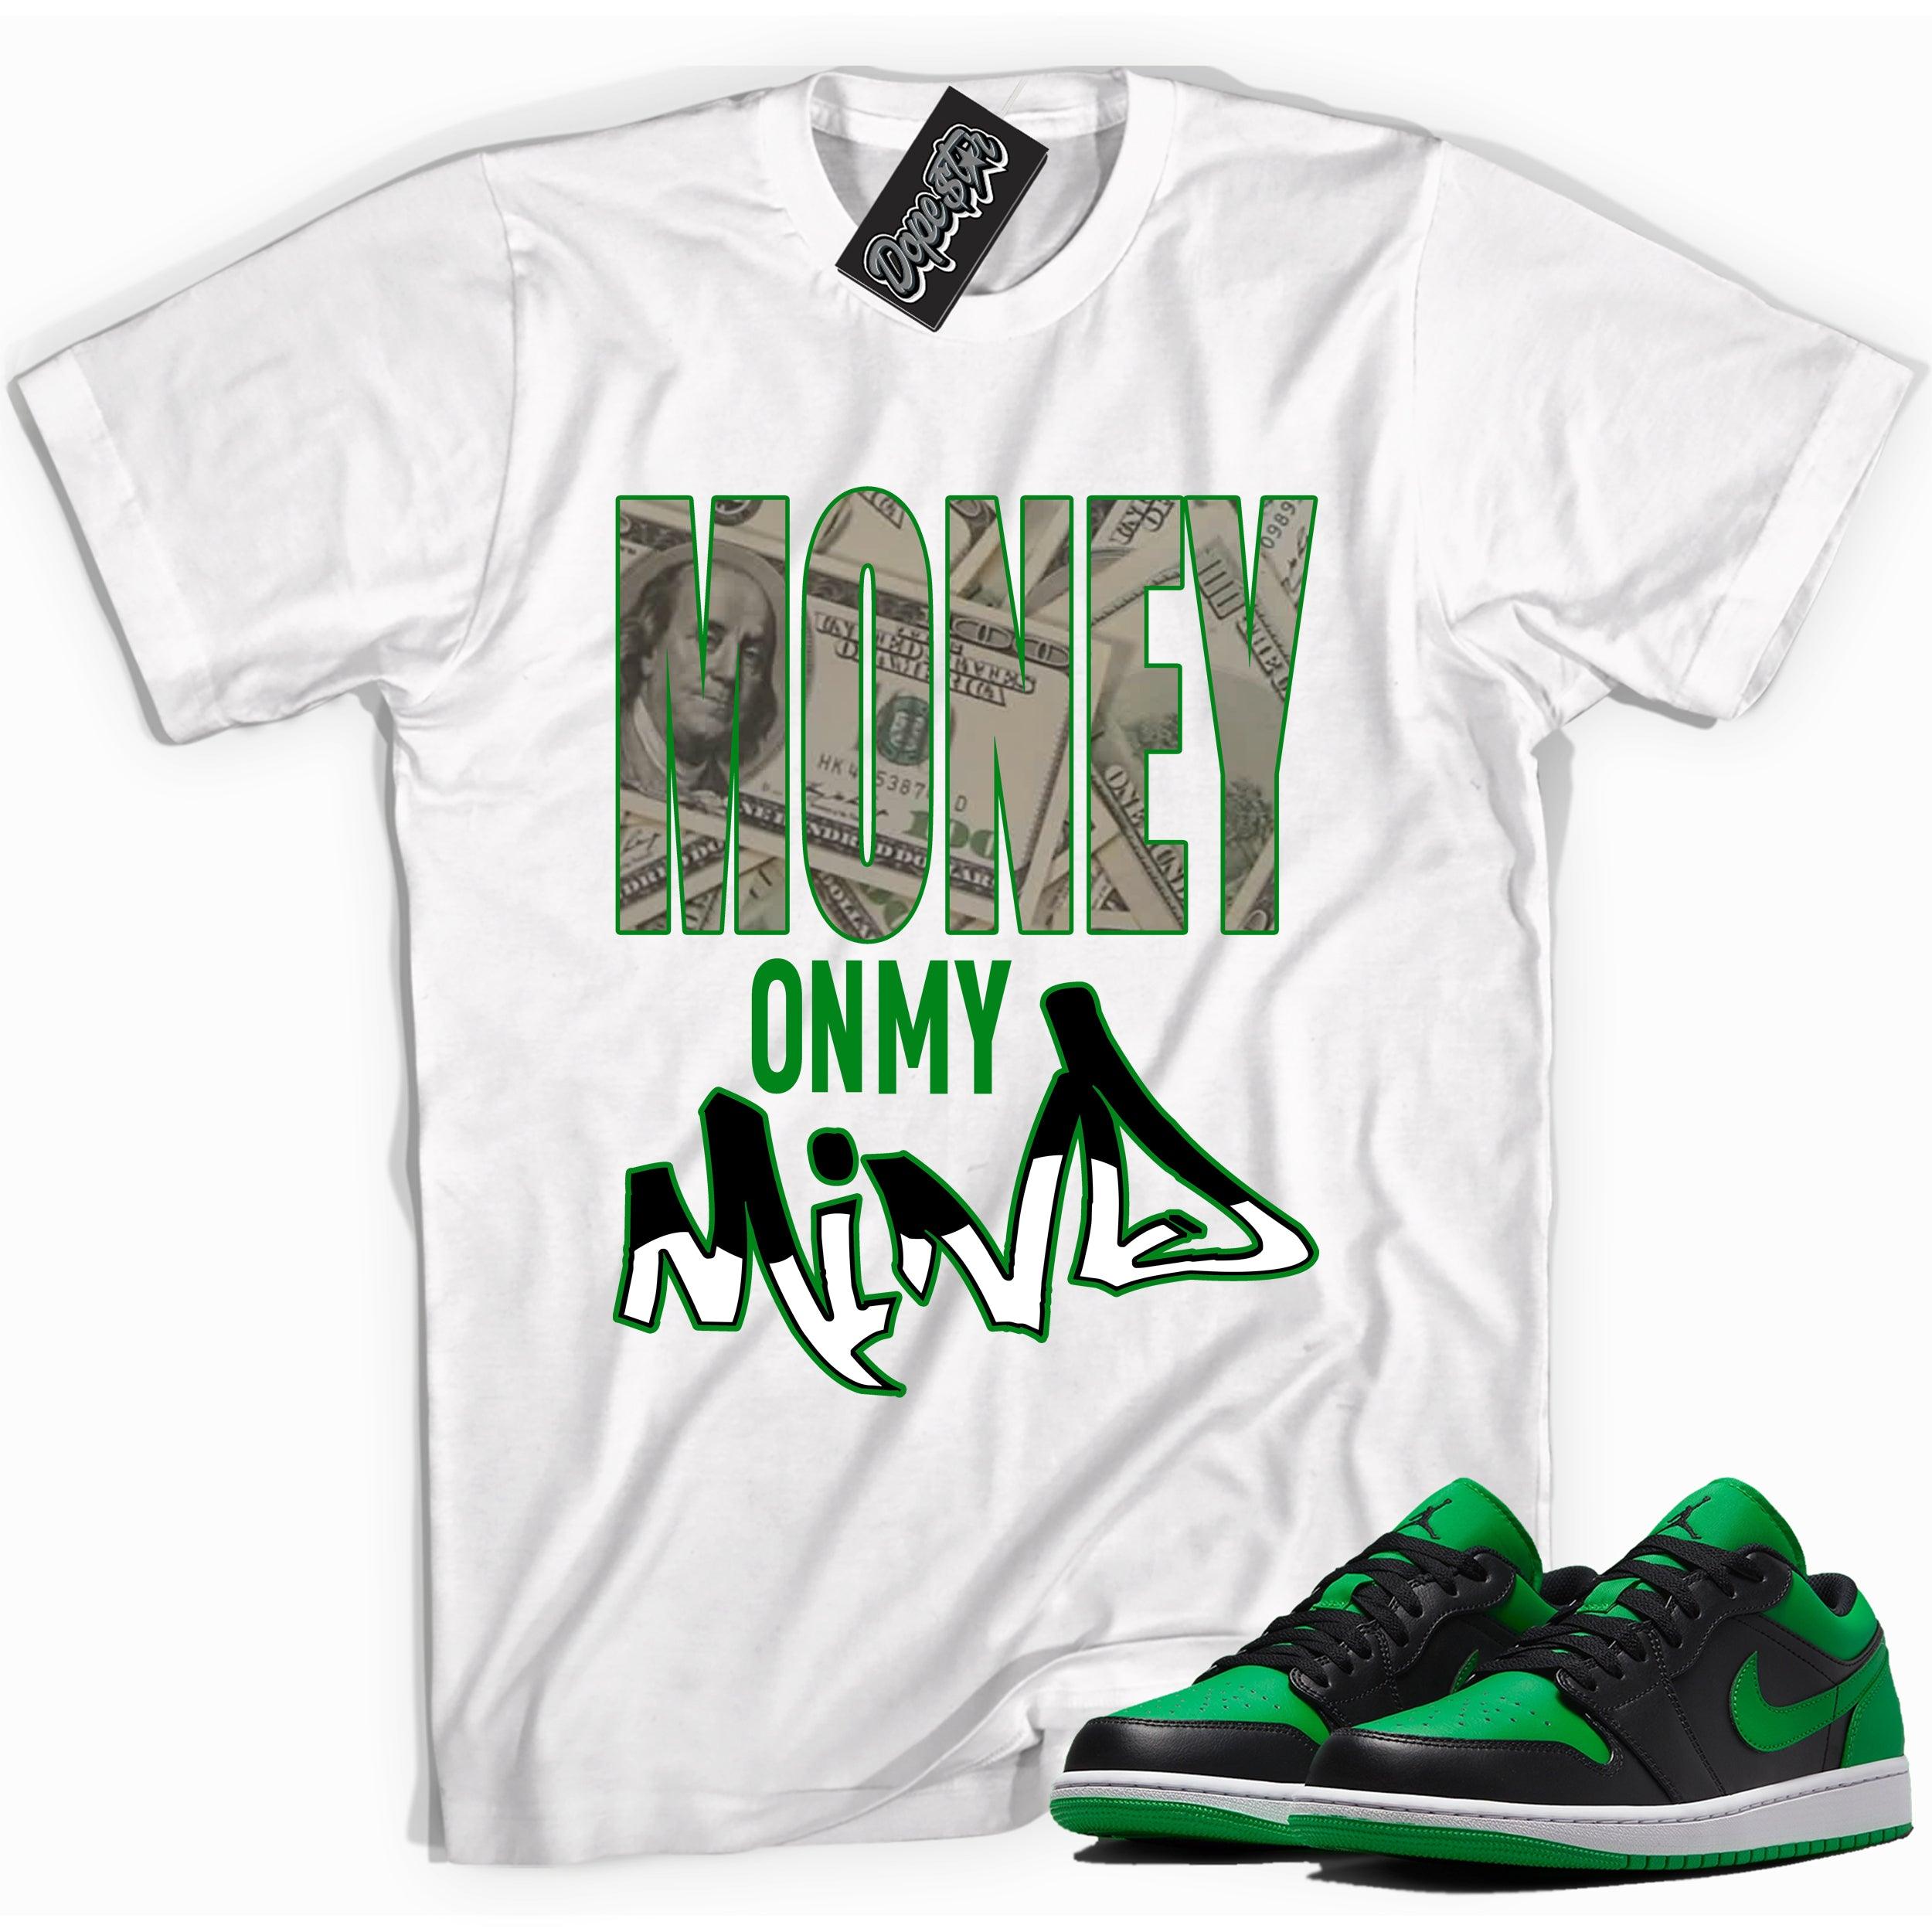 Cool white graphic tee with 'money on my mind' print, that perfectly matches Air Jordan 1 Low Lucky Green sneakers